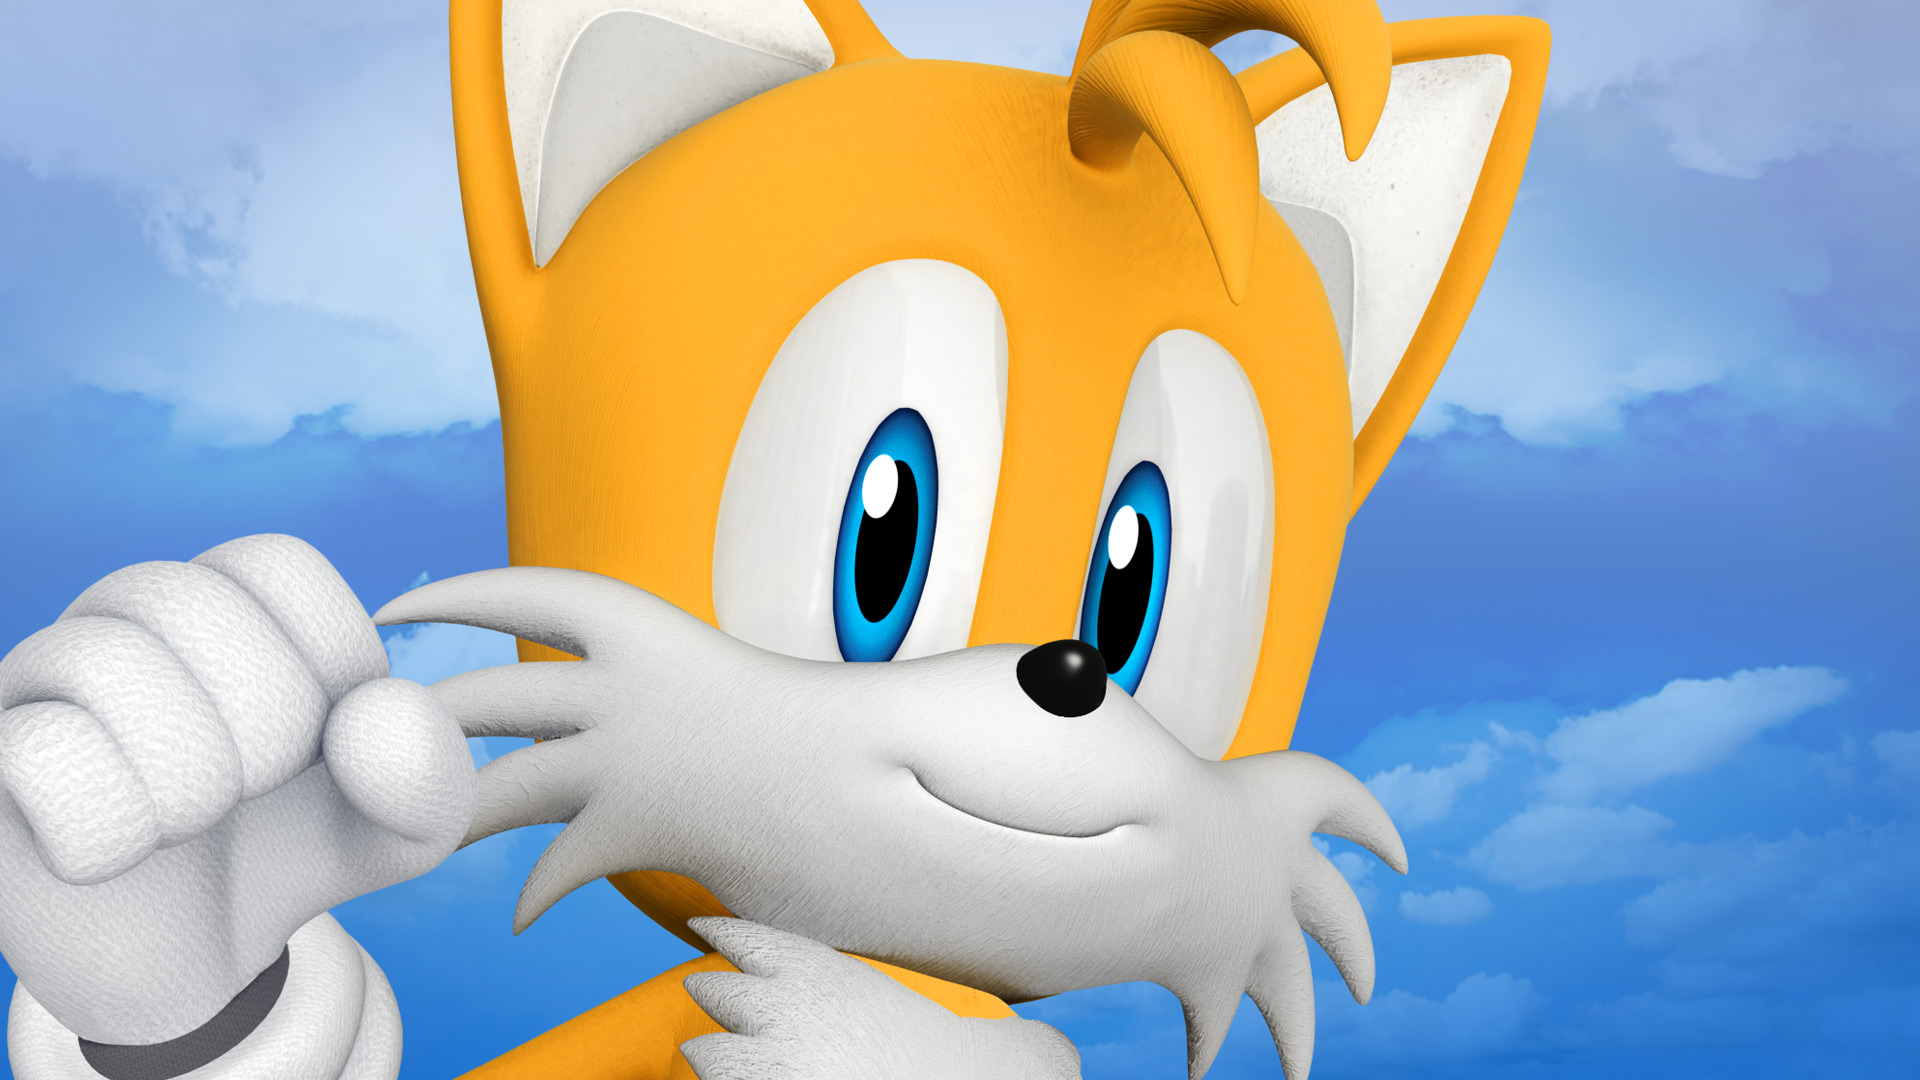 sonic, The, Hedgehog, Tails Wallpaper